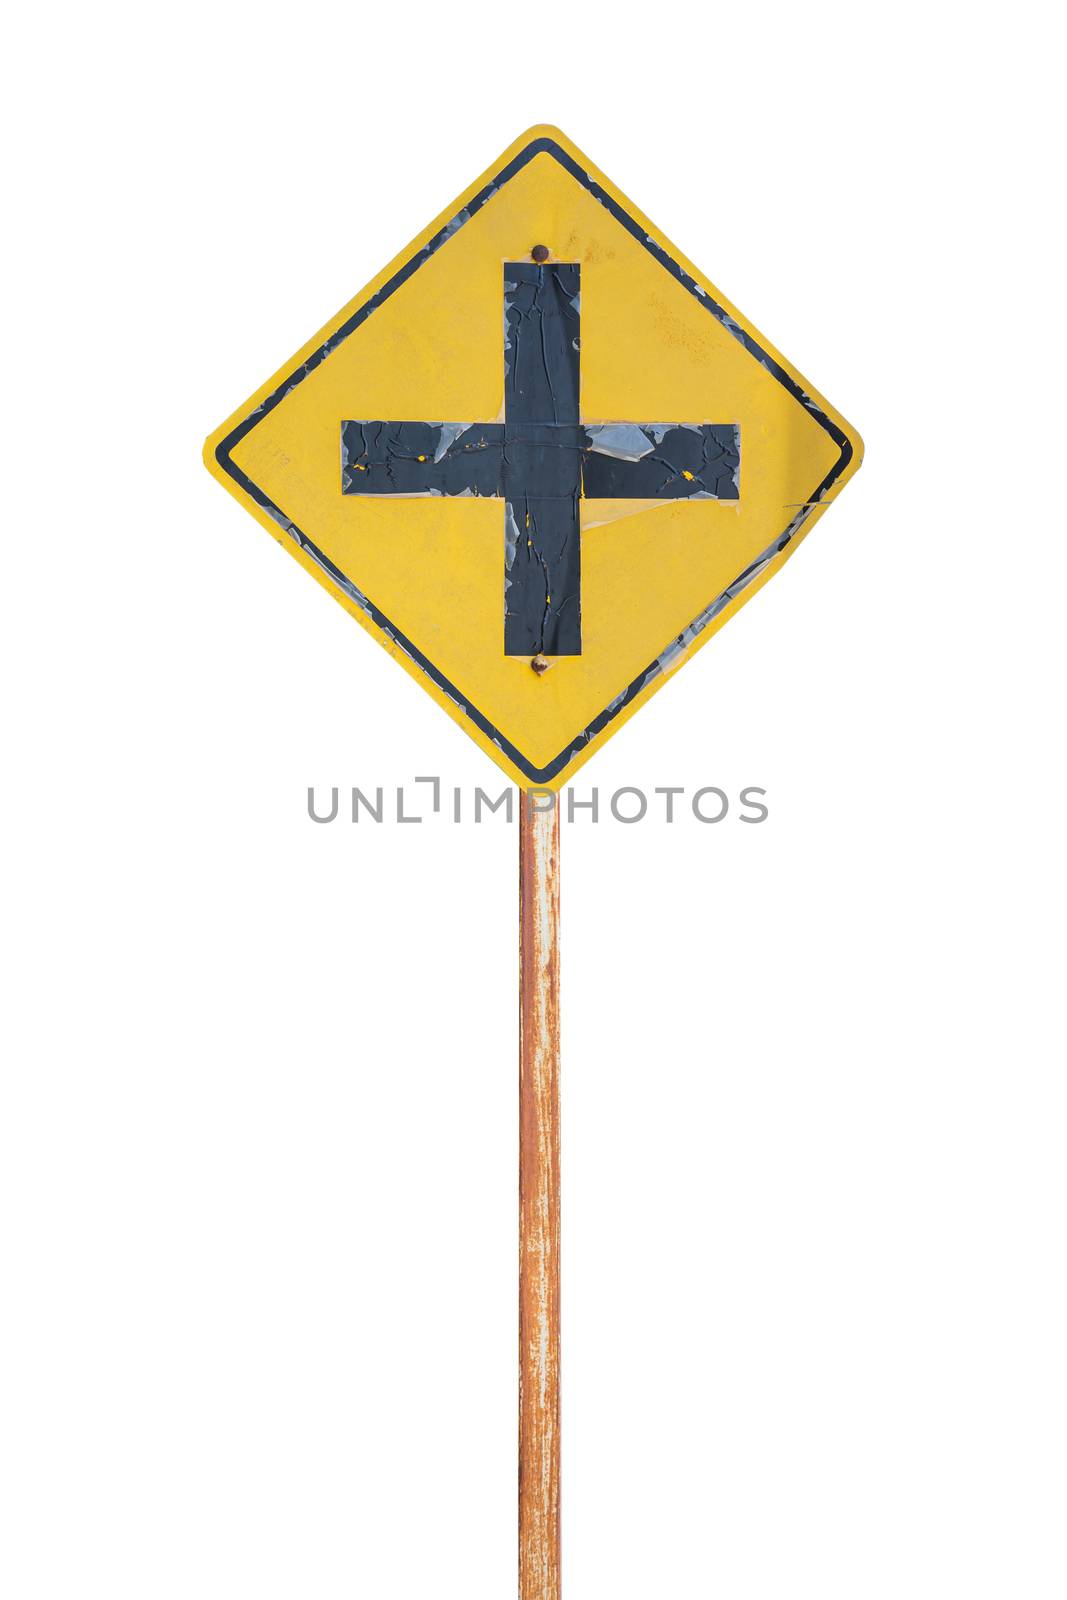 Old Intersection ahead road sign isolated on white background